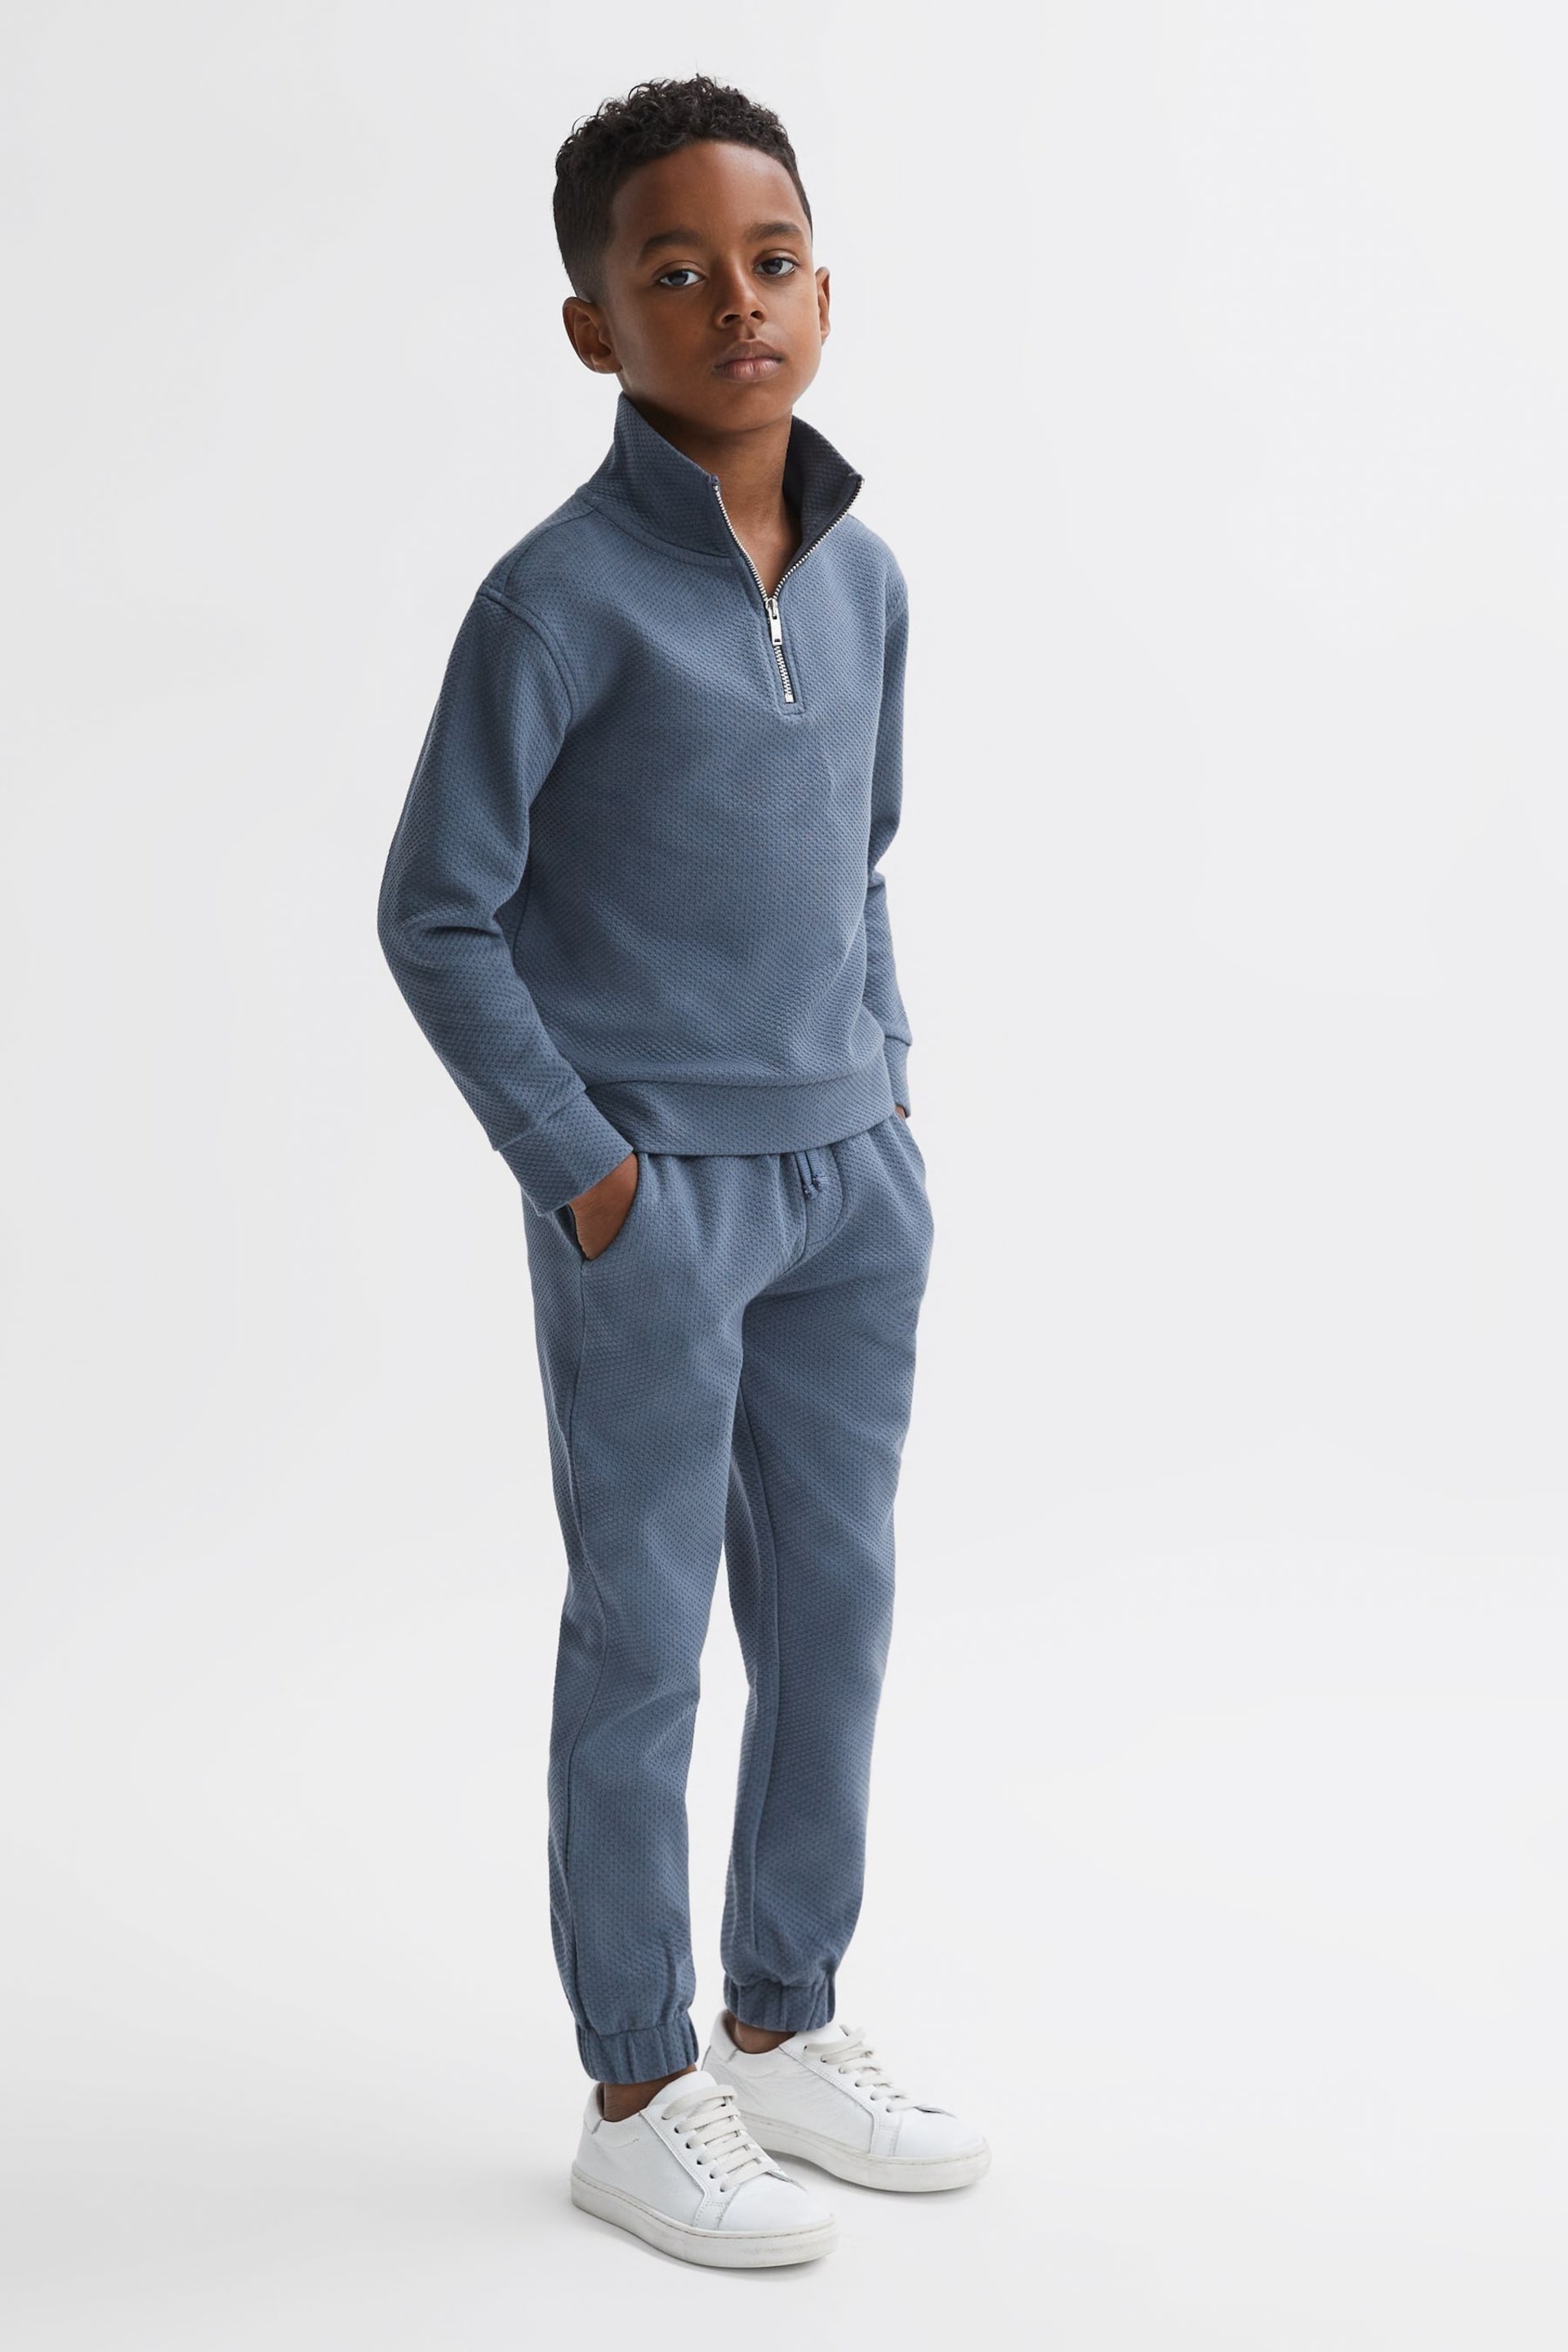 Reiss Airforce Blue Hector Senior Textured Drawstring Joggers - Image 3 of 5